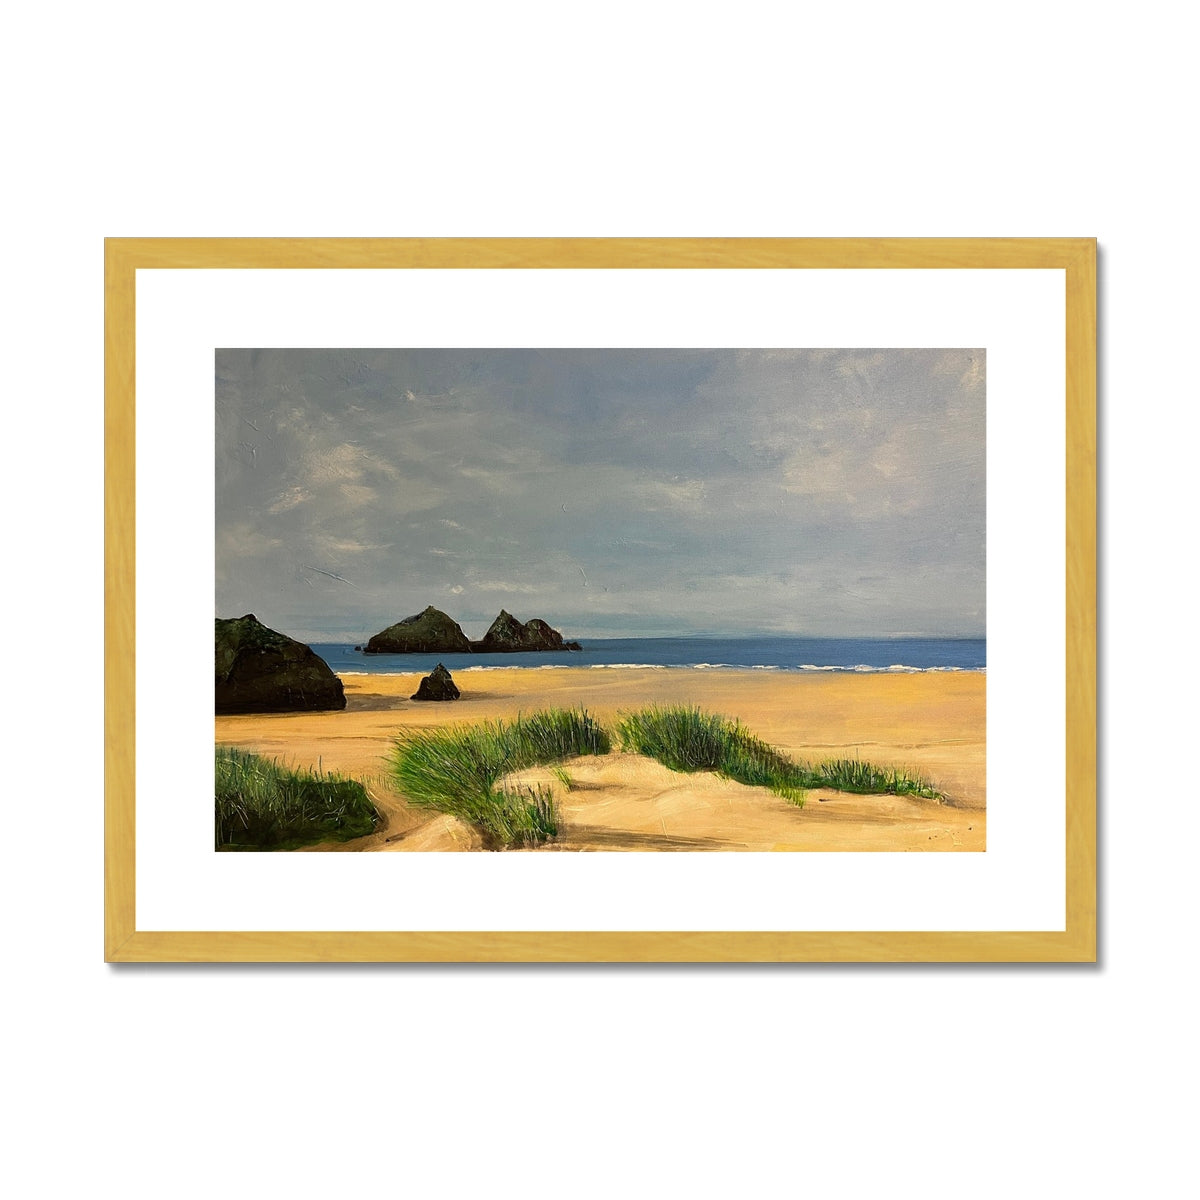 Holywell Bay Cornwall Painting | Antique Framed & Mounted Prints From Scotland-Antique Framed & Mounted Prints-World Art Gallery-A2 Landscape-Gold Frame-Paintings, Prints, Homeware, Art Gifts From Scotland By Scottish Artist Kevin Hunter